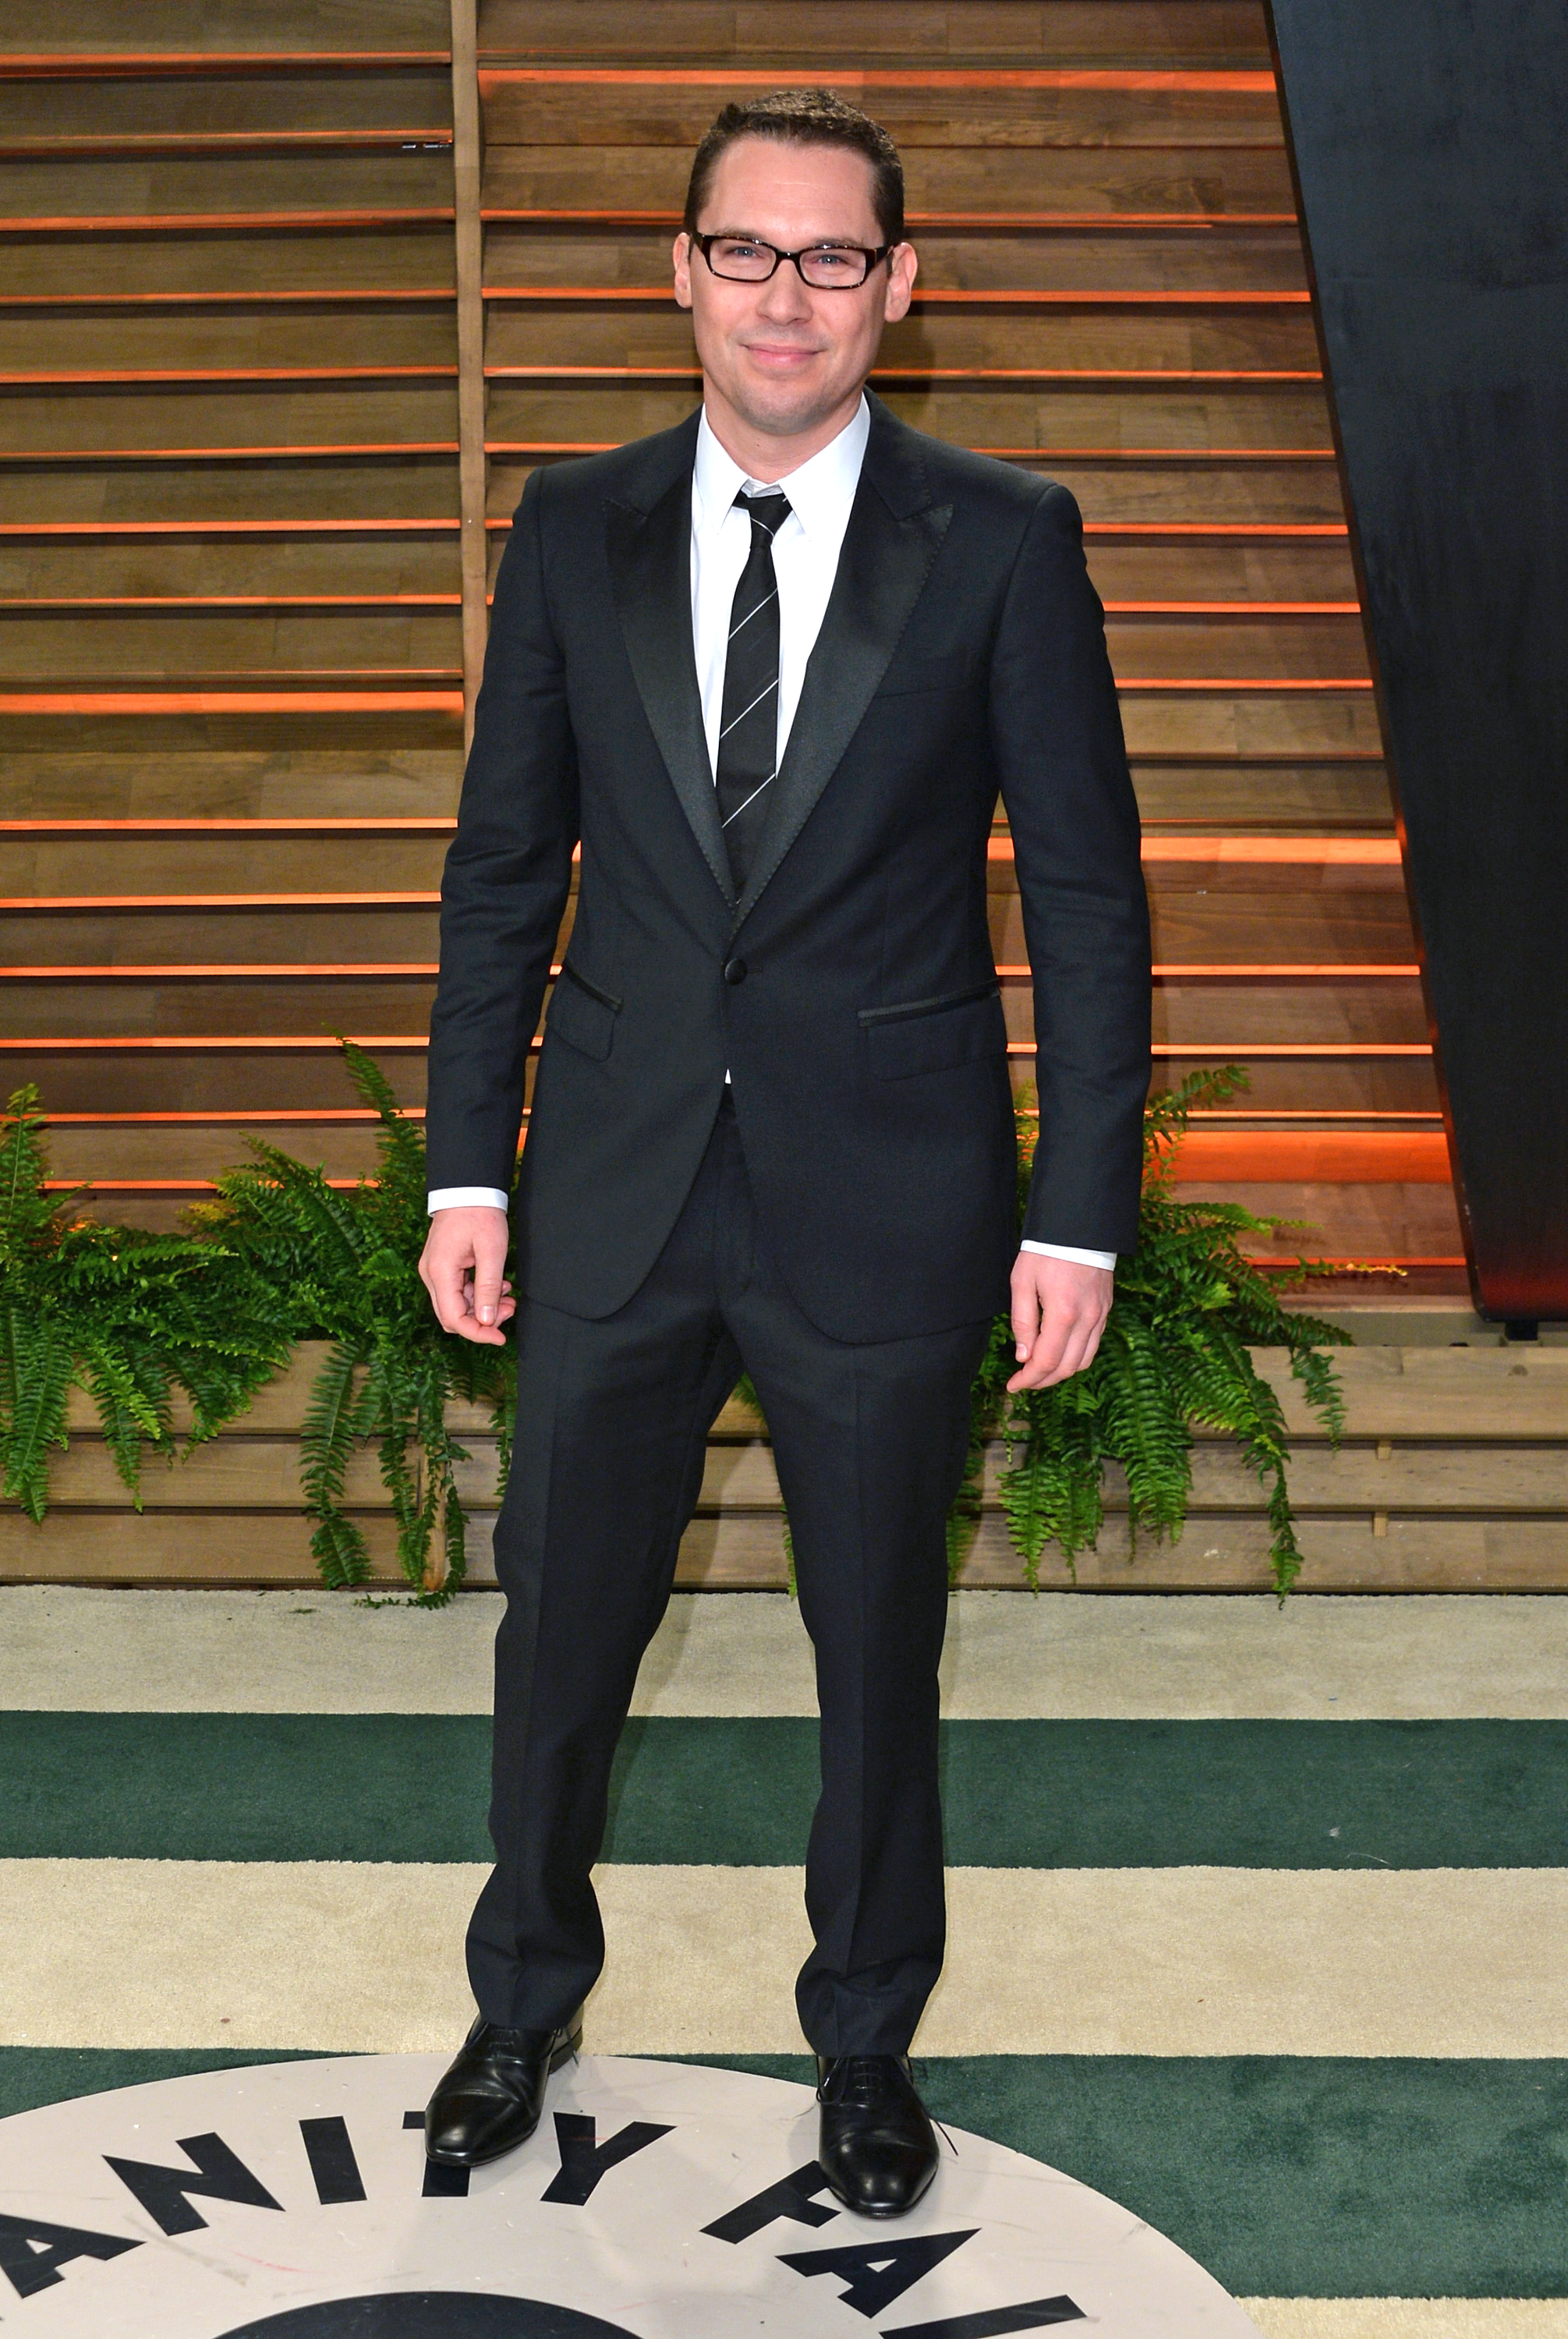 Director Bryan Singer attends the 2014 Vanity Fair Oscar Party hosted by Graydon Carter on March 2, 2014 in West Hollywood, Calif.